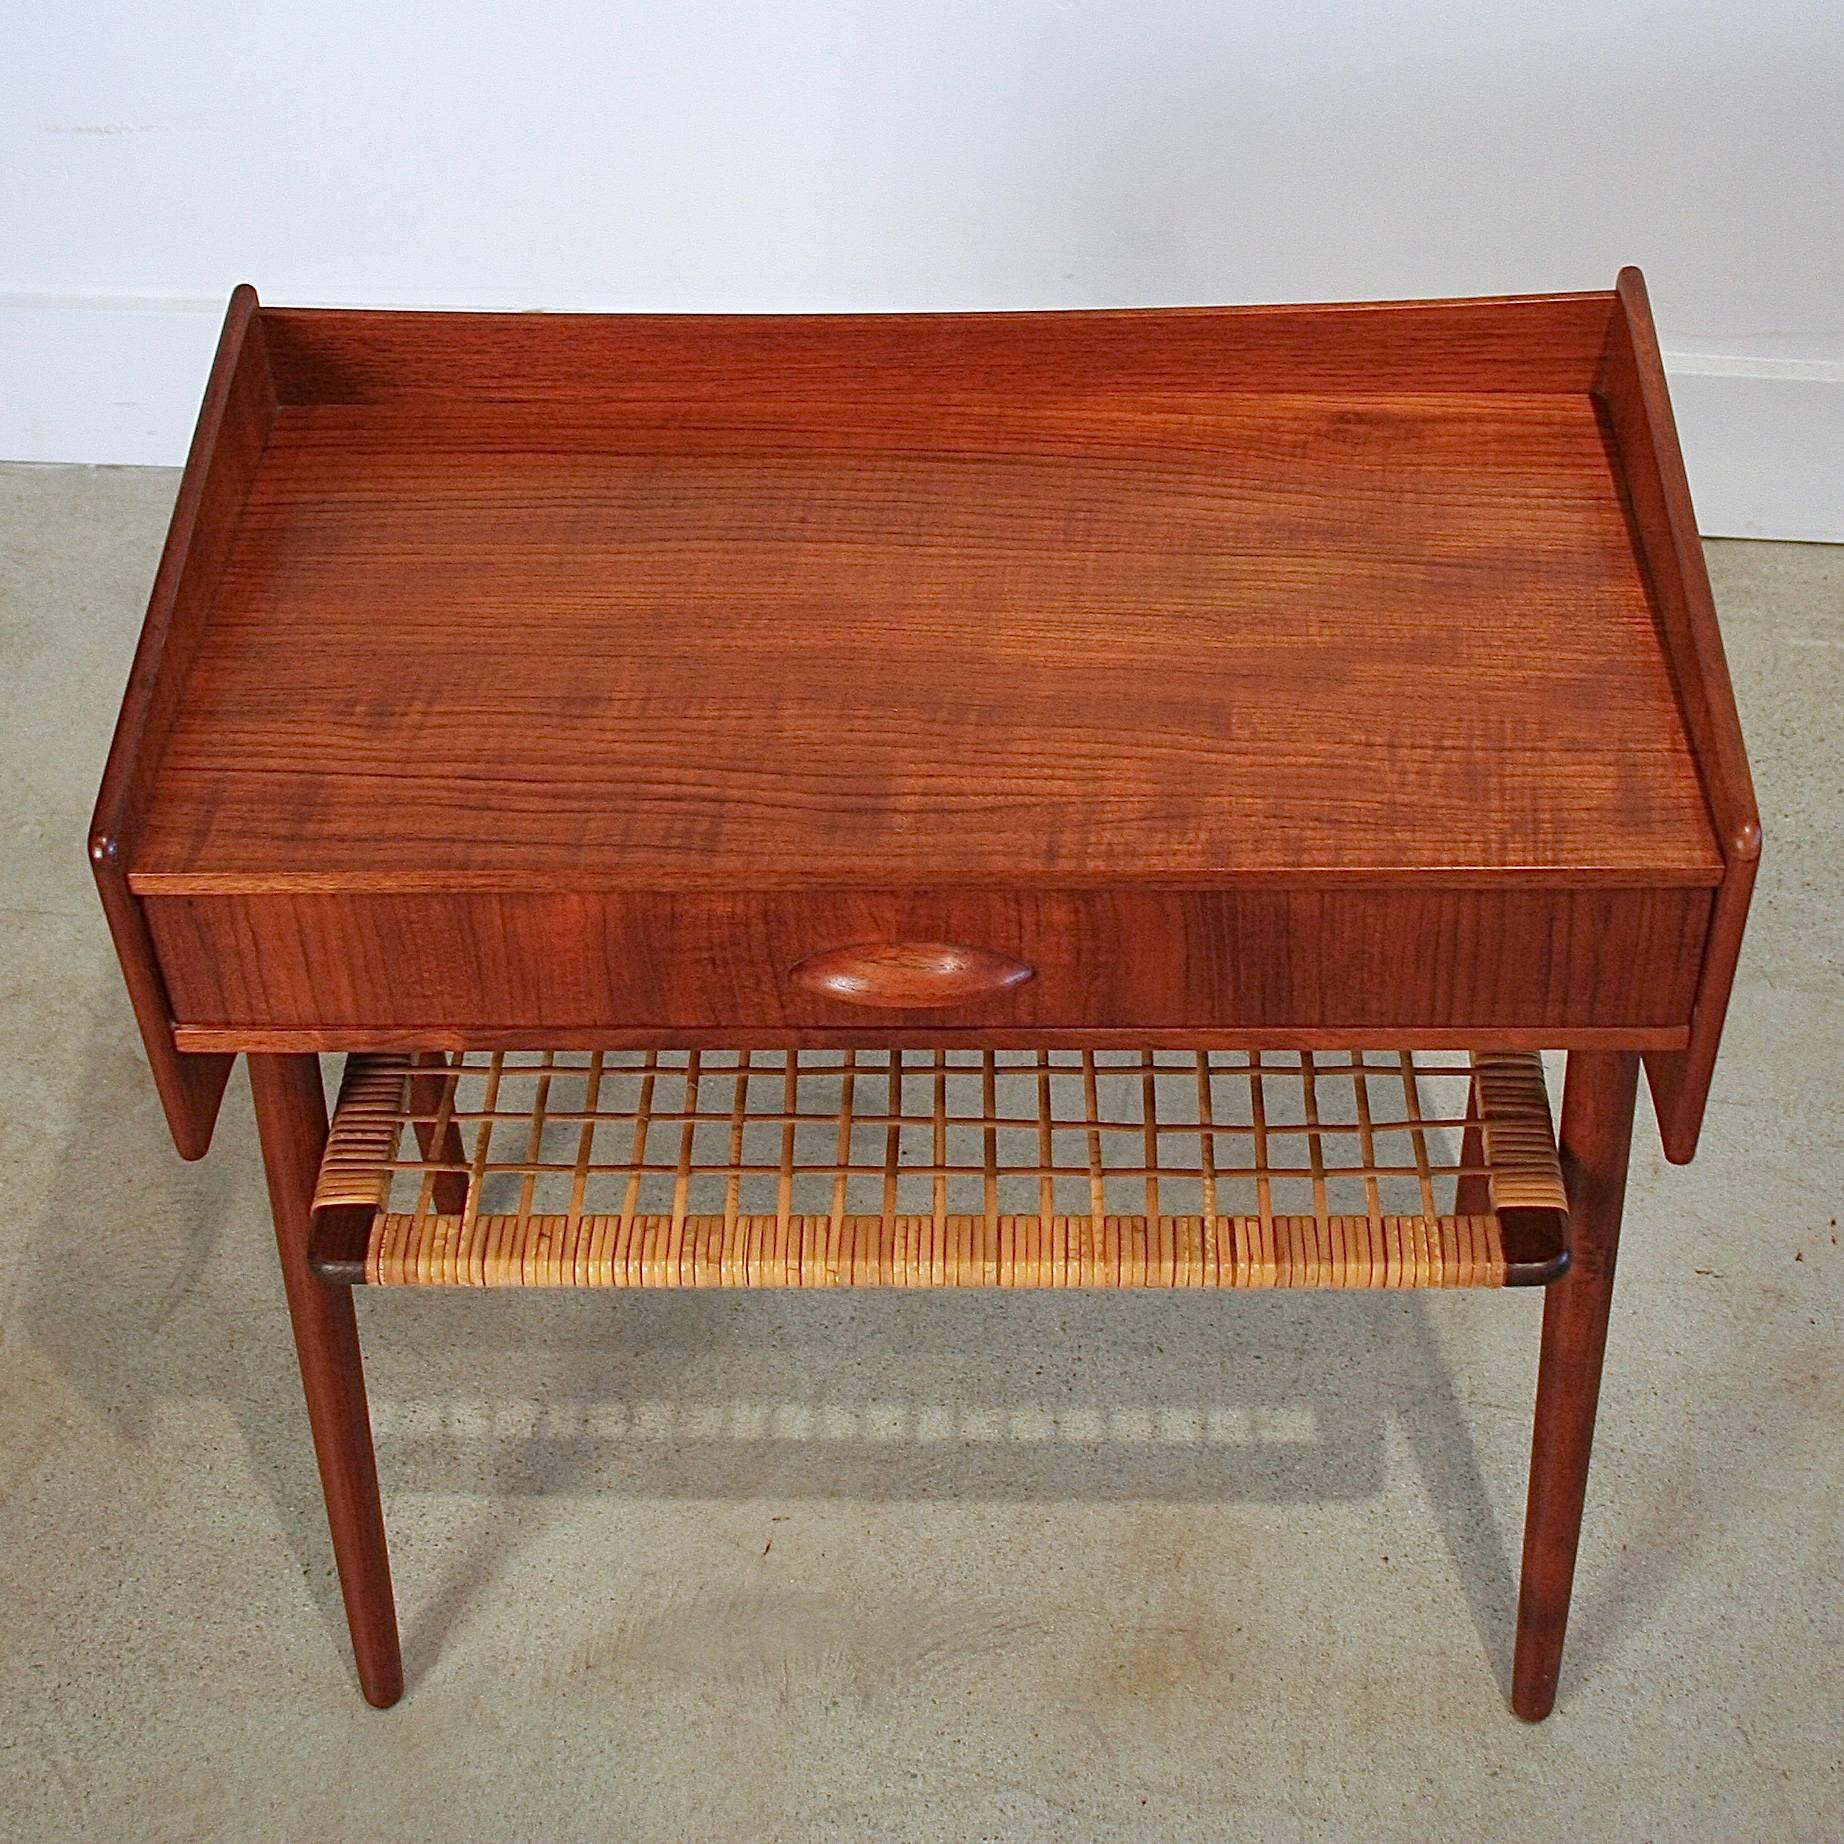 Mid-20th Century Vintage Danish Teak and Cane Side Table For Sale